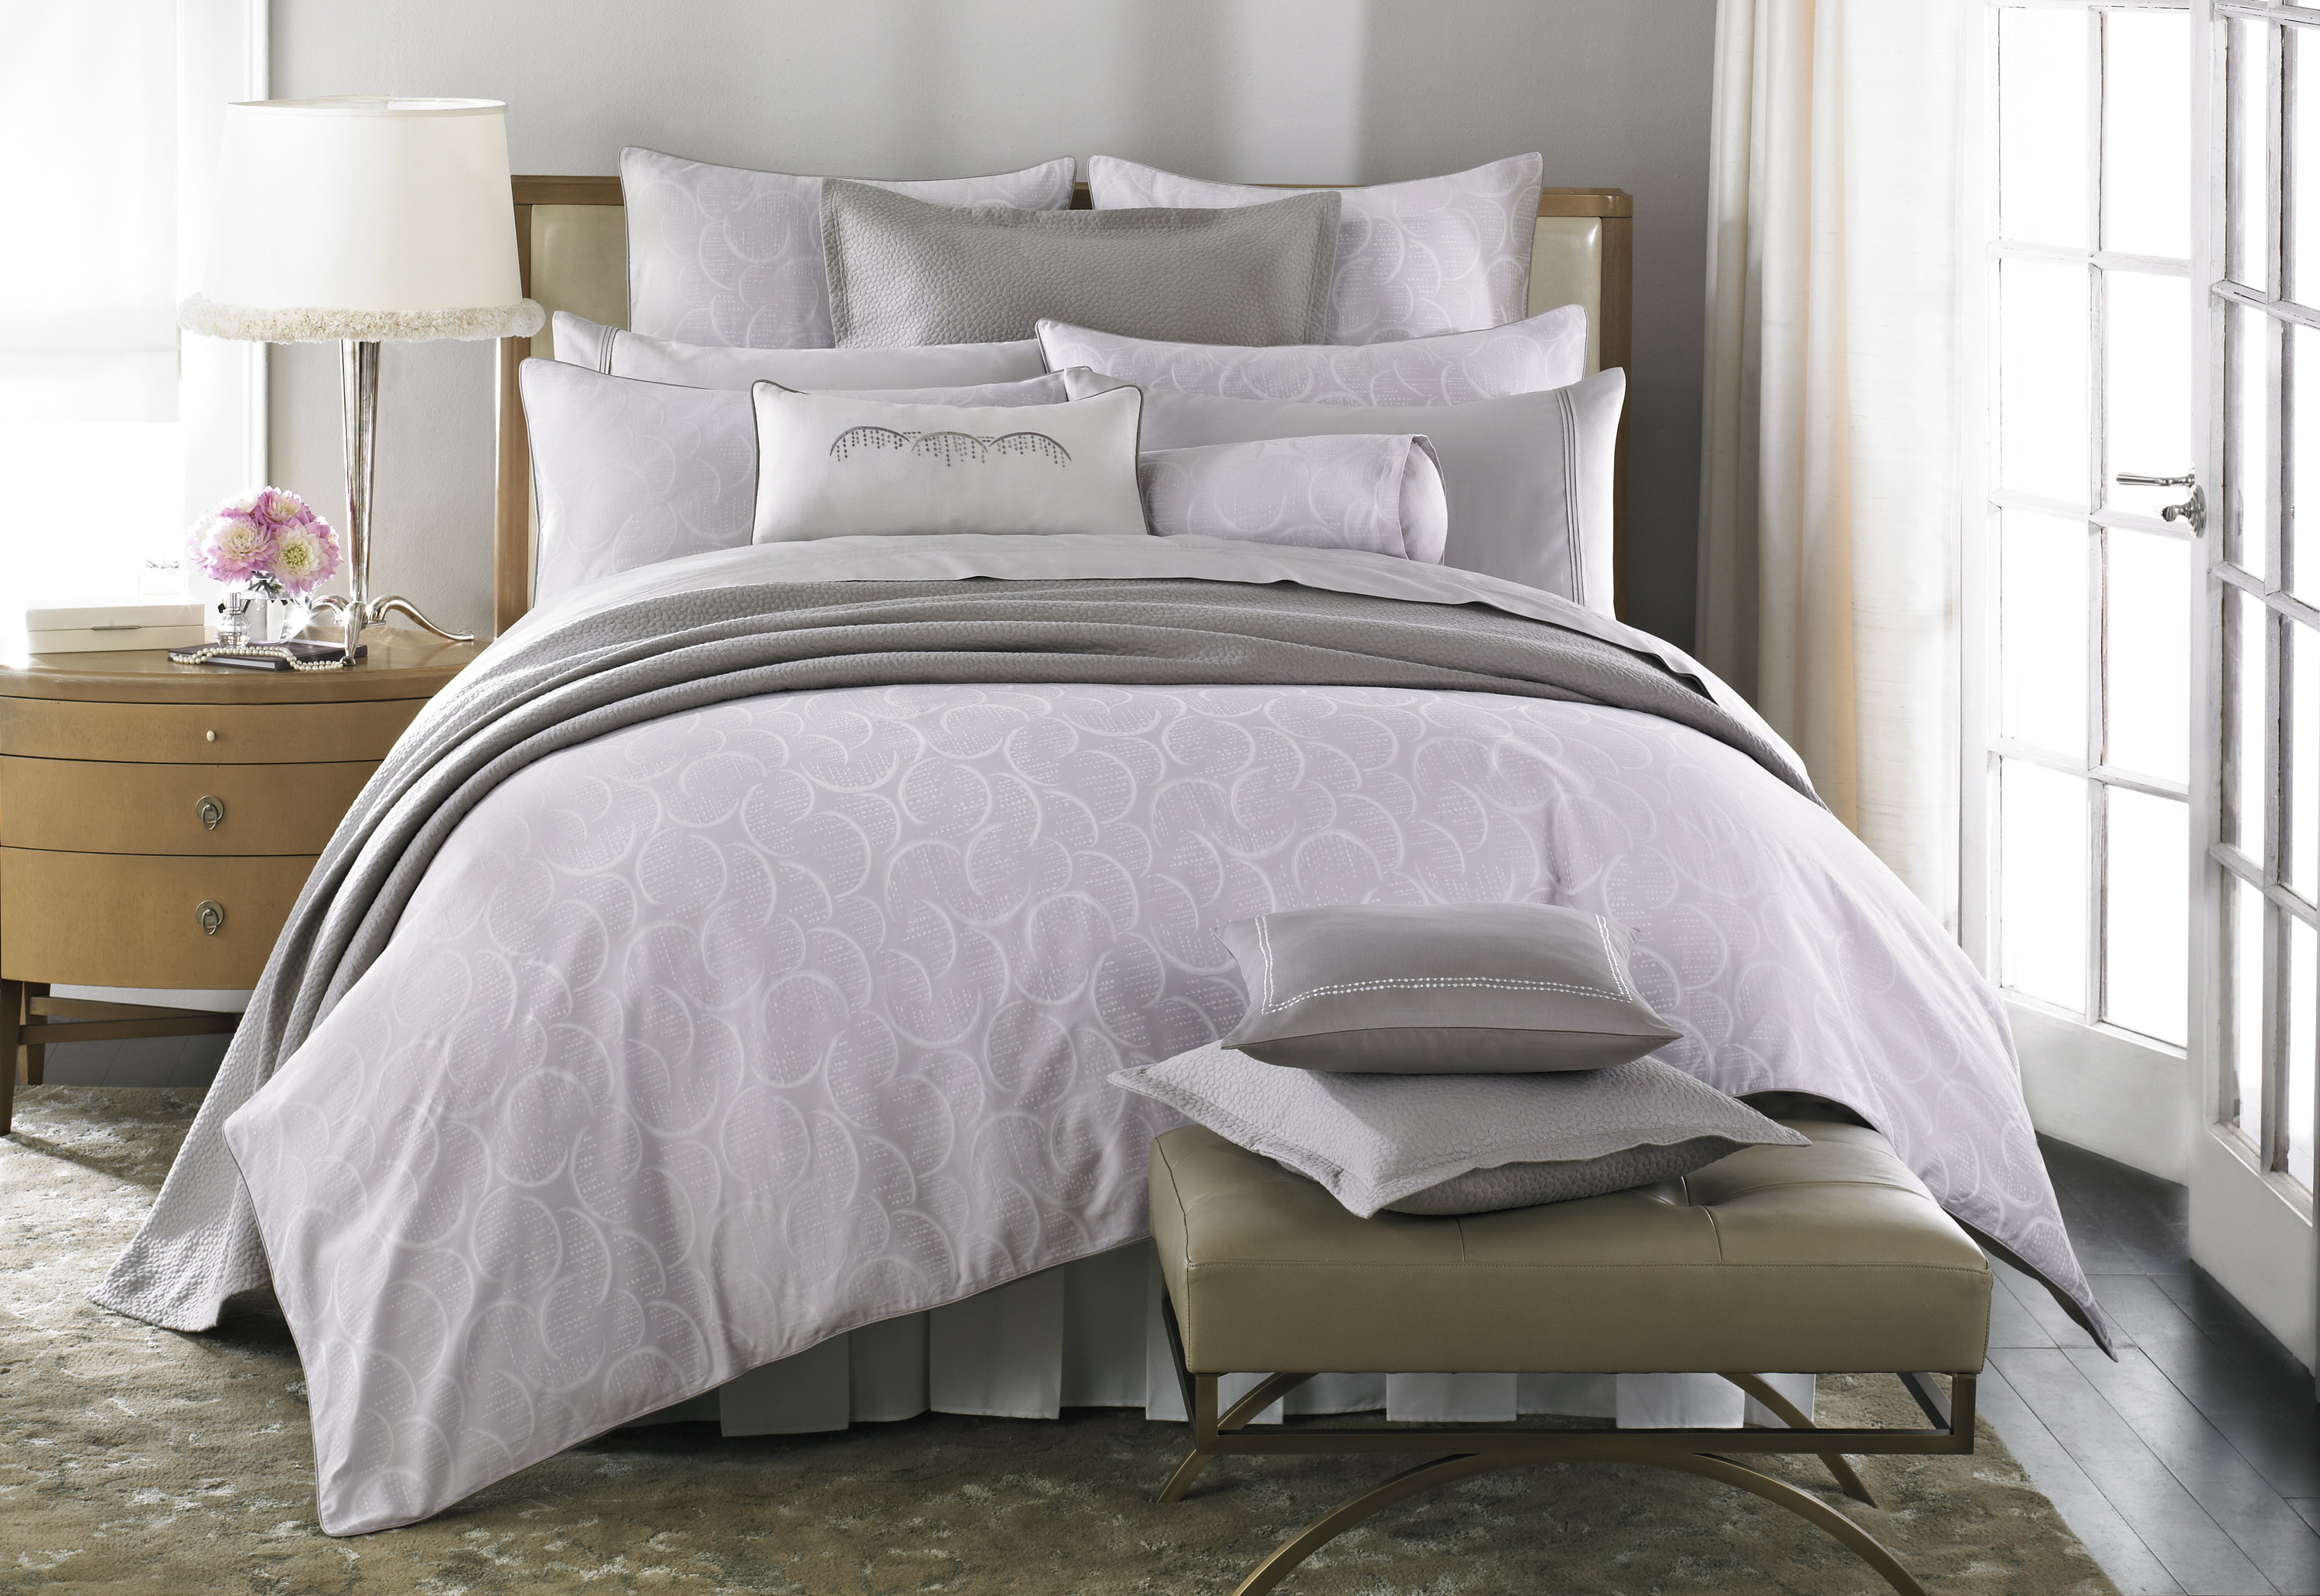 Less fashion more forever barbara barry launches signature bedding.